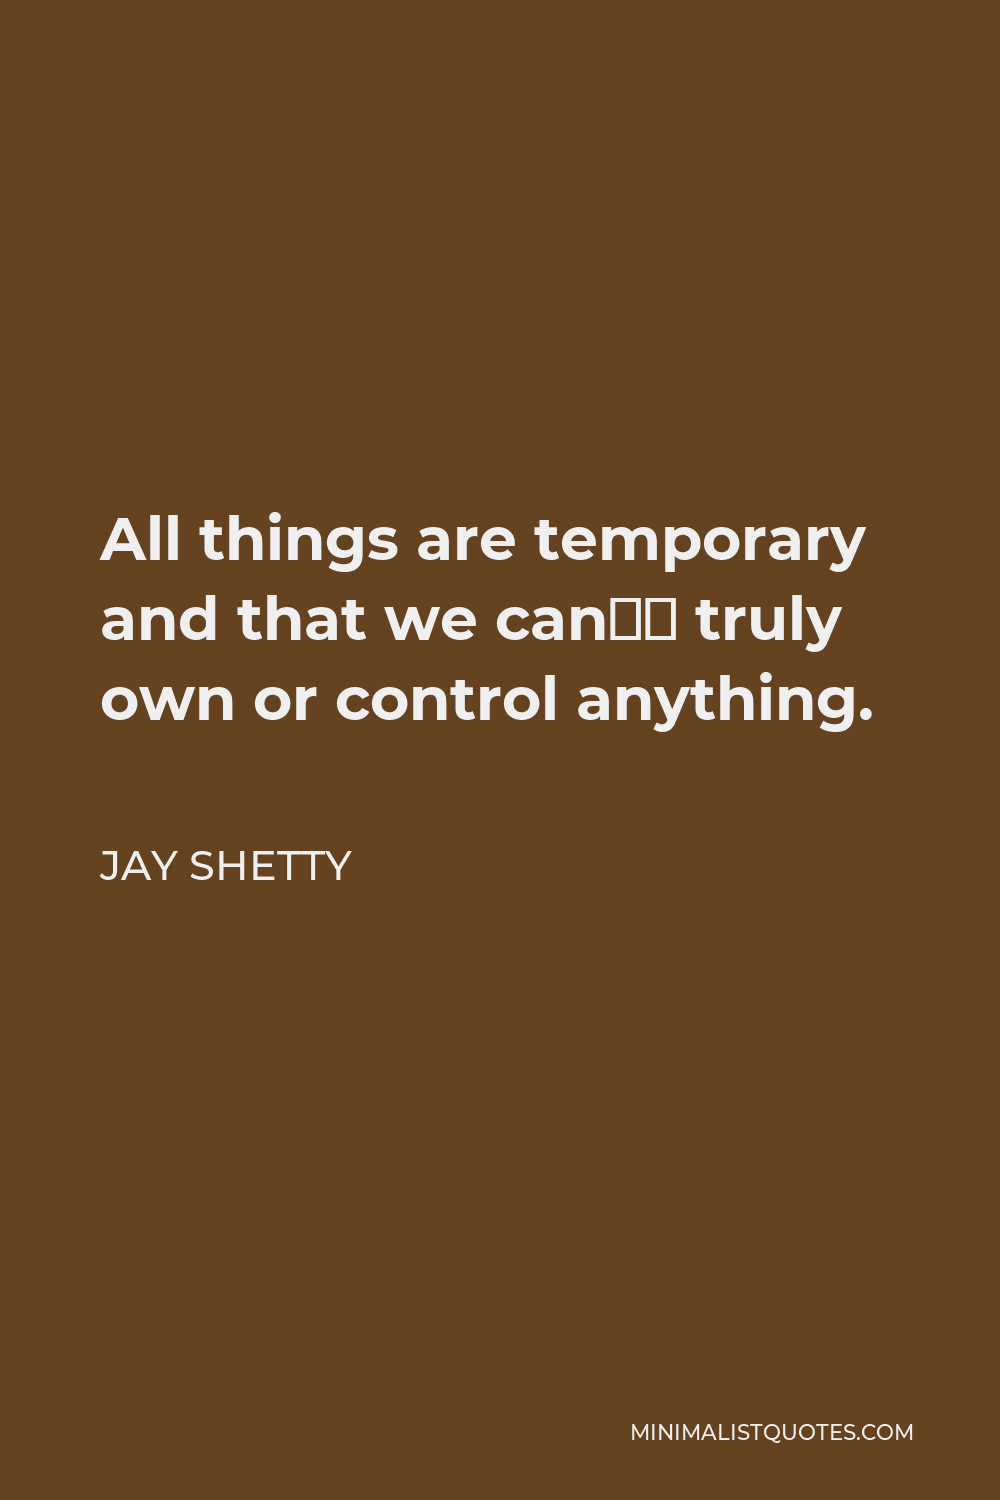 Jay Shetty Quote - All things are temporary and that we can’t truly own or control anything.